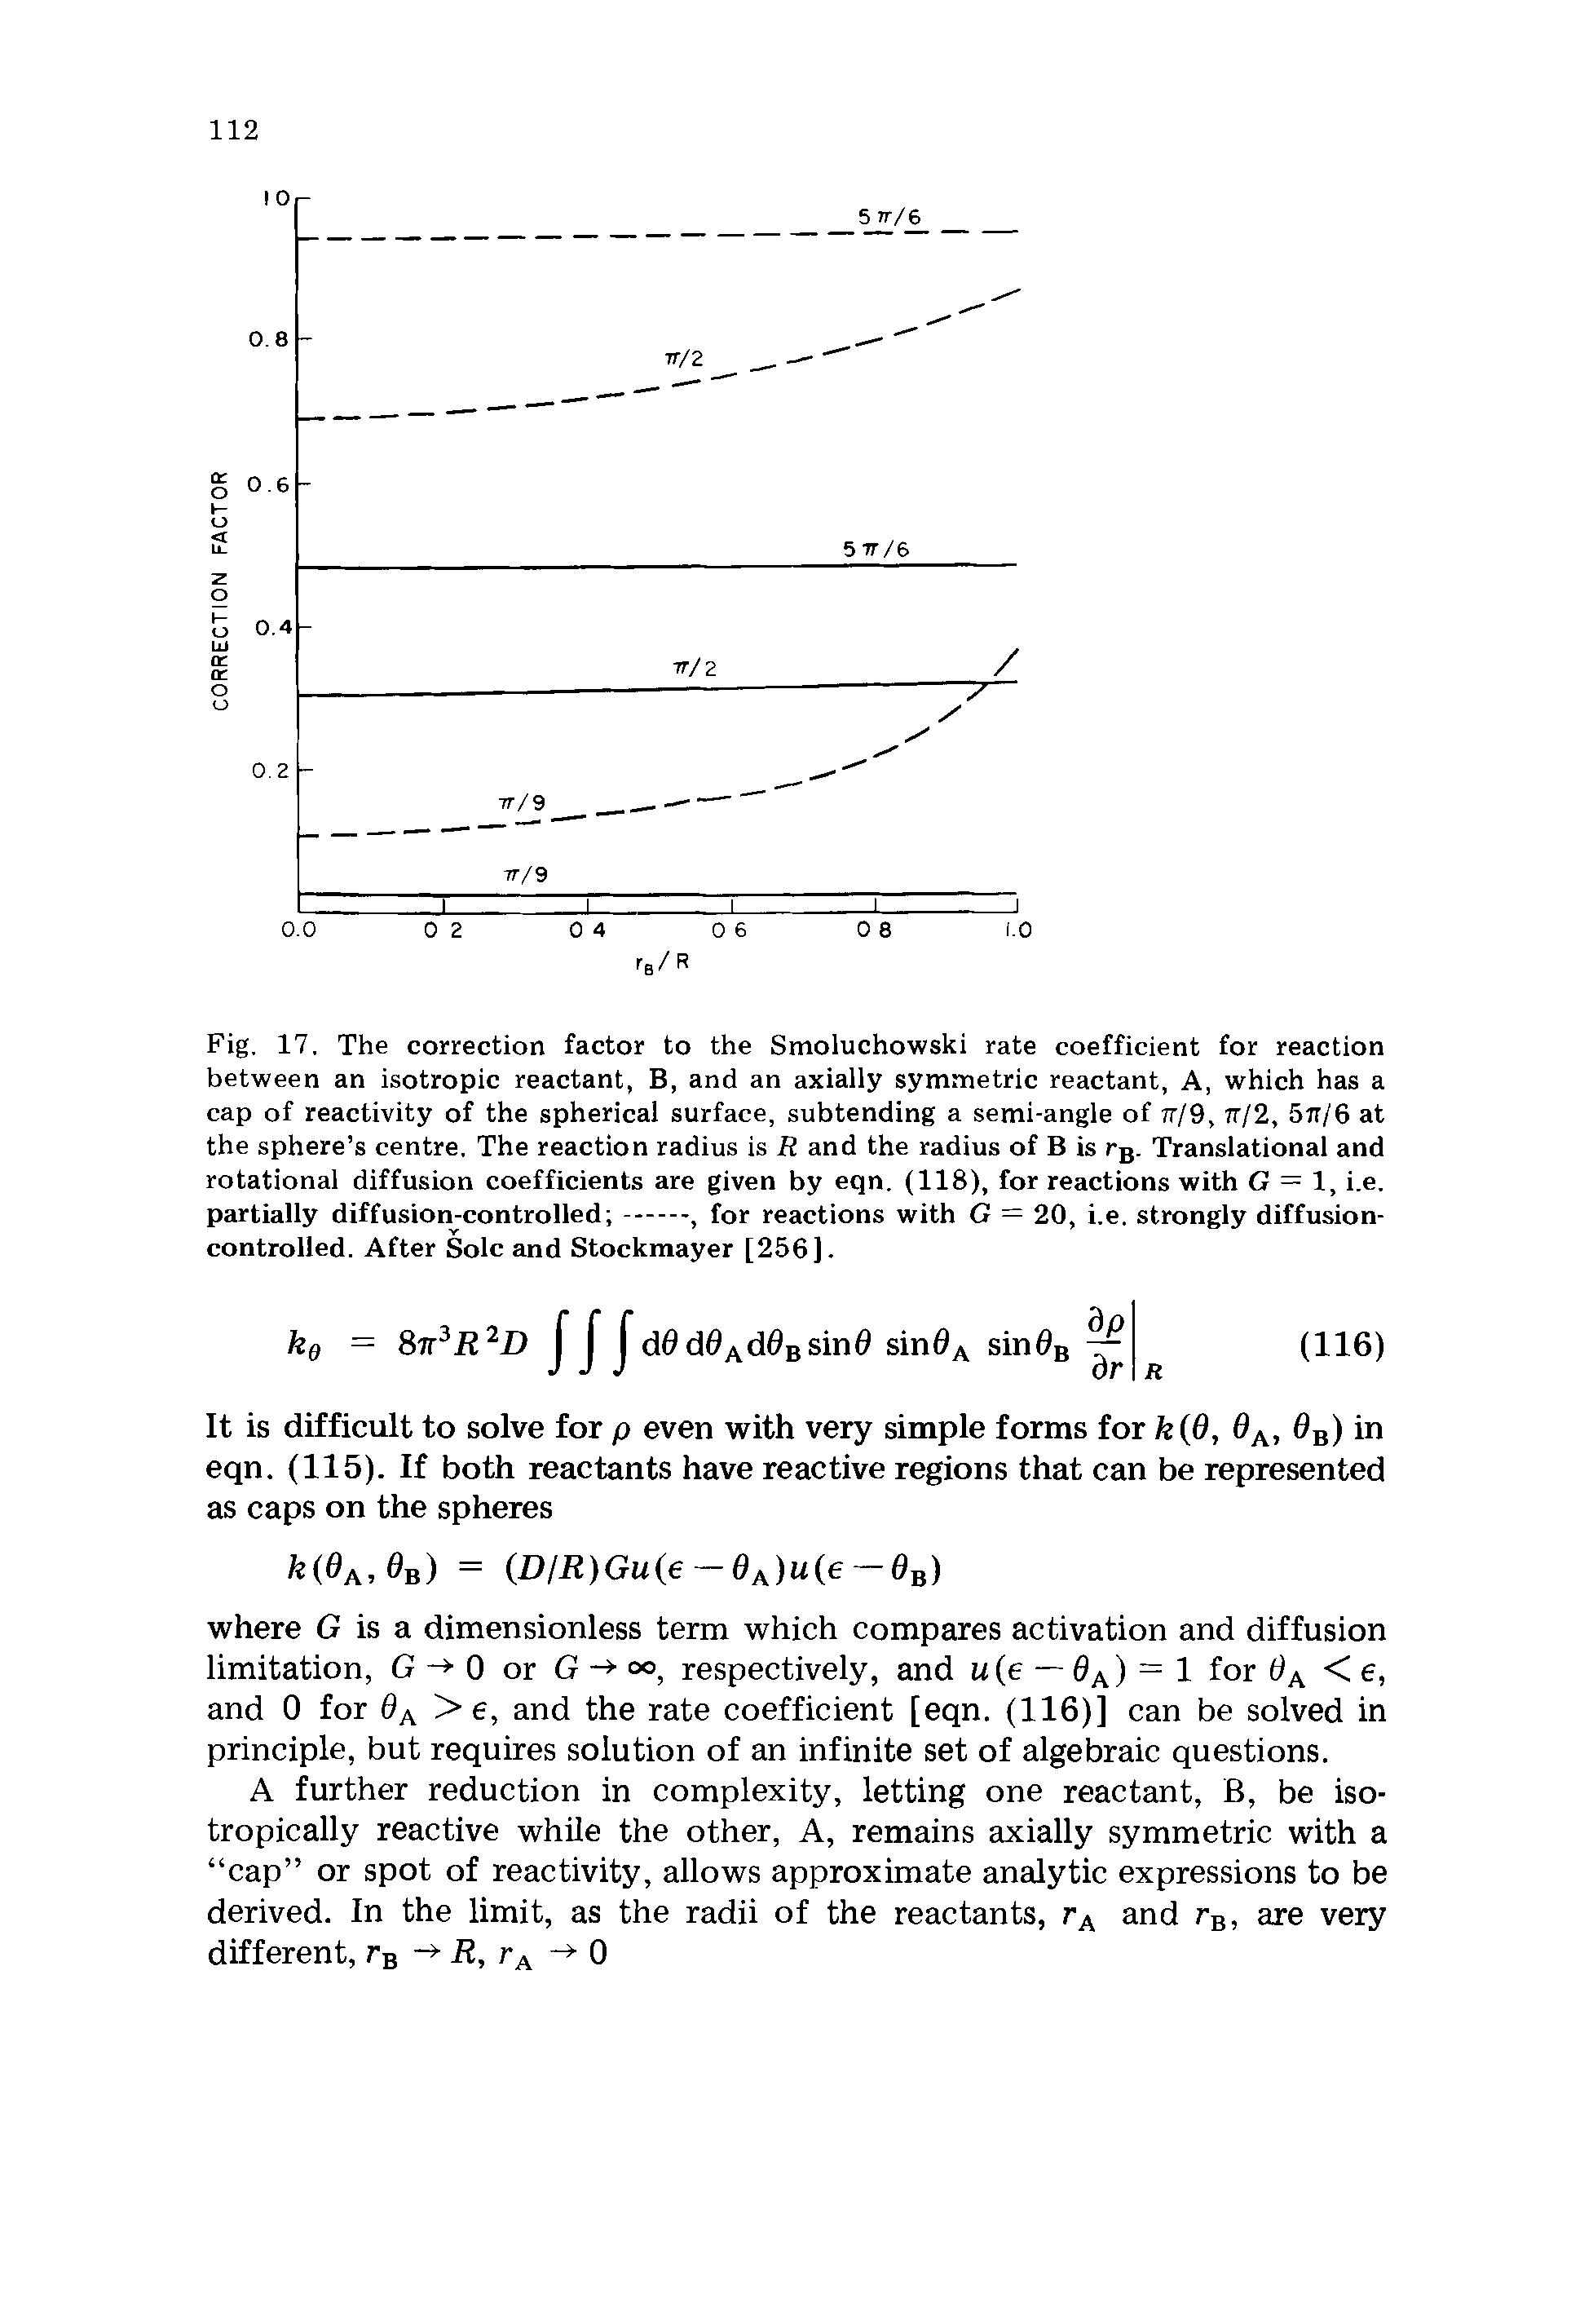 Fig. 17, The correction factor to the Smoluchowski rate coefficient for reaction between an isotropic reactant, B, and an axially symmetric reactant, A, which has a cap of reactivity of the spherical surface, subtending a semi-angle of 77/9, 77/2, 577/6 at the sphere s centre. The reaction radius is R and the radius of B is rB. Translational and rotational diffusion coefficients are given by eqn. (118), for reactions with G = 1, i.e,...